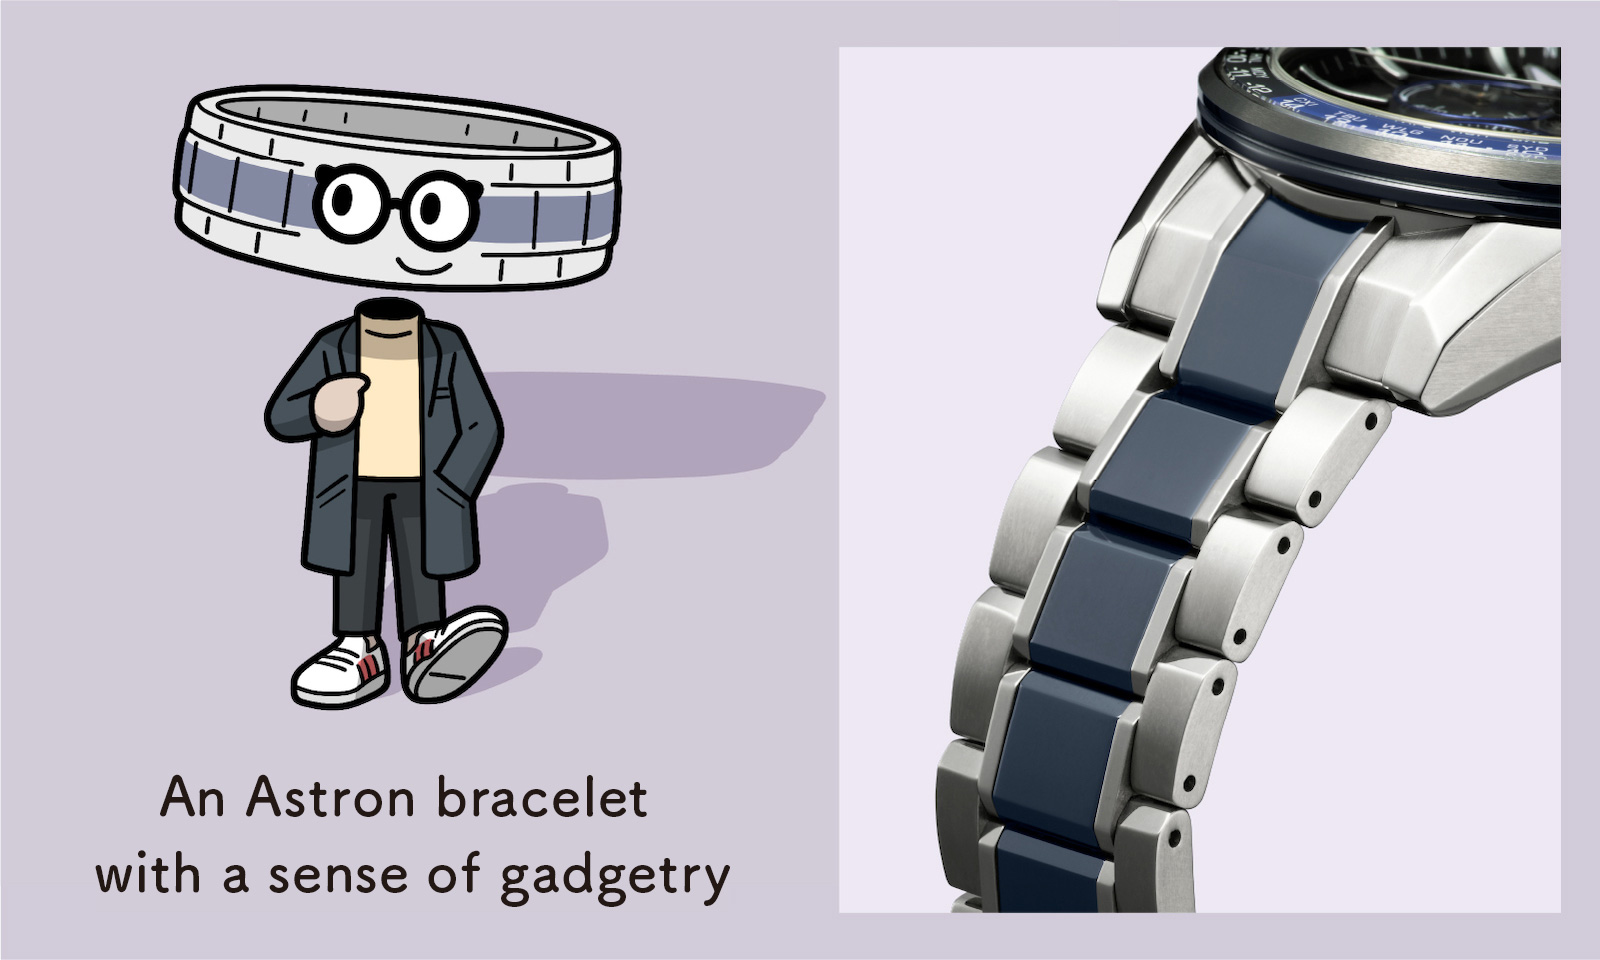 An Astron bracelet with a sense of gadgetry (Enlarged photo of the bracelet)